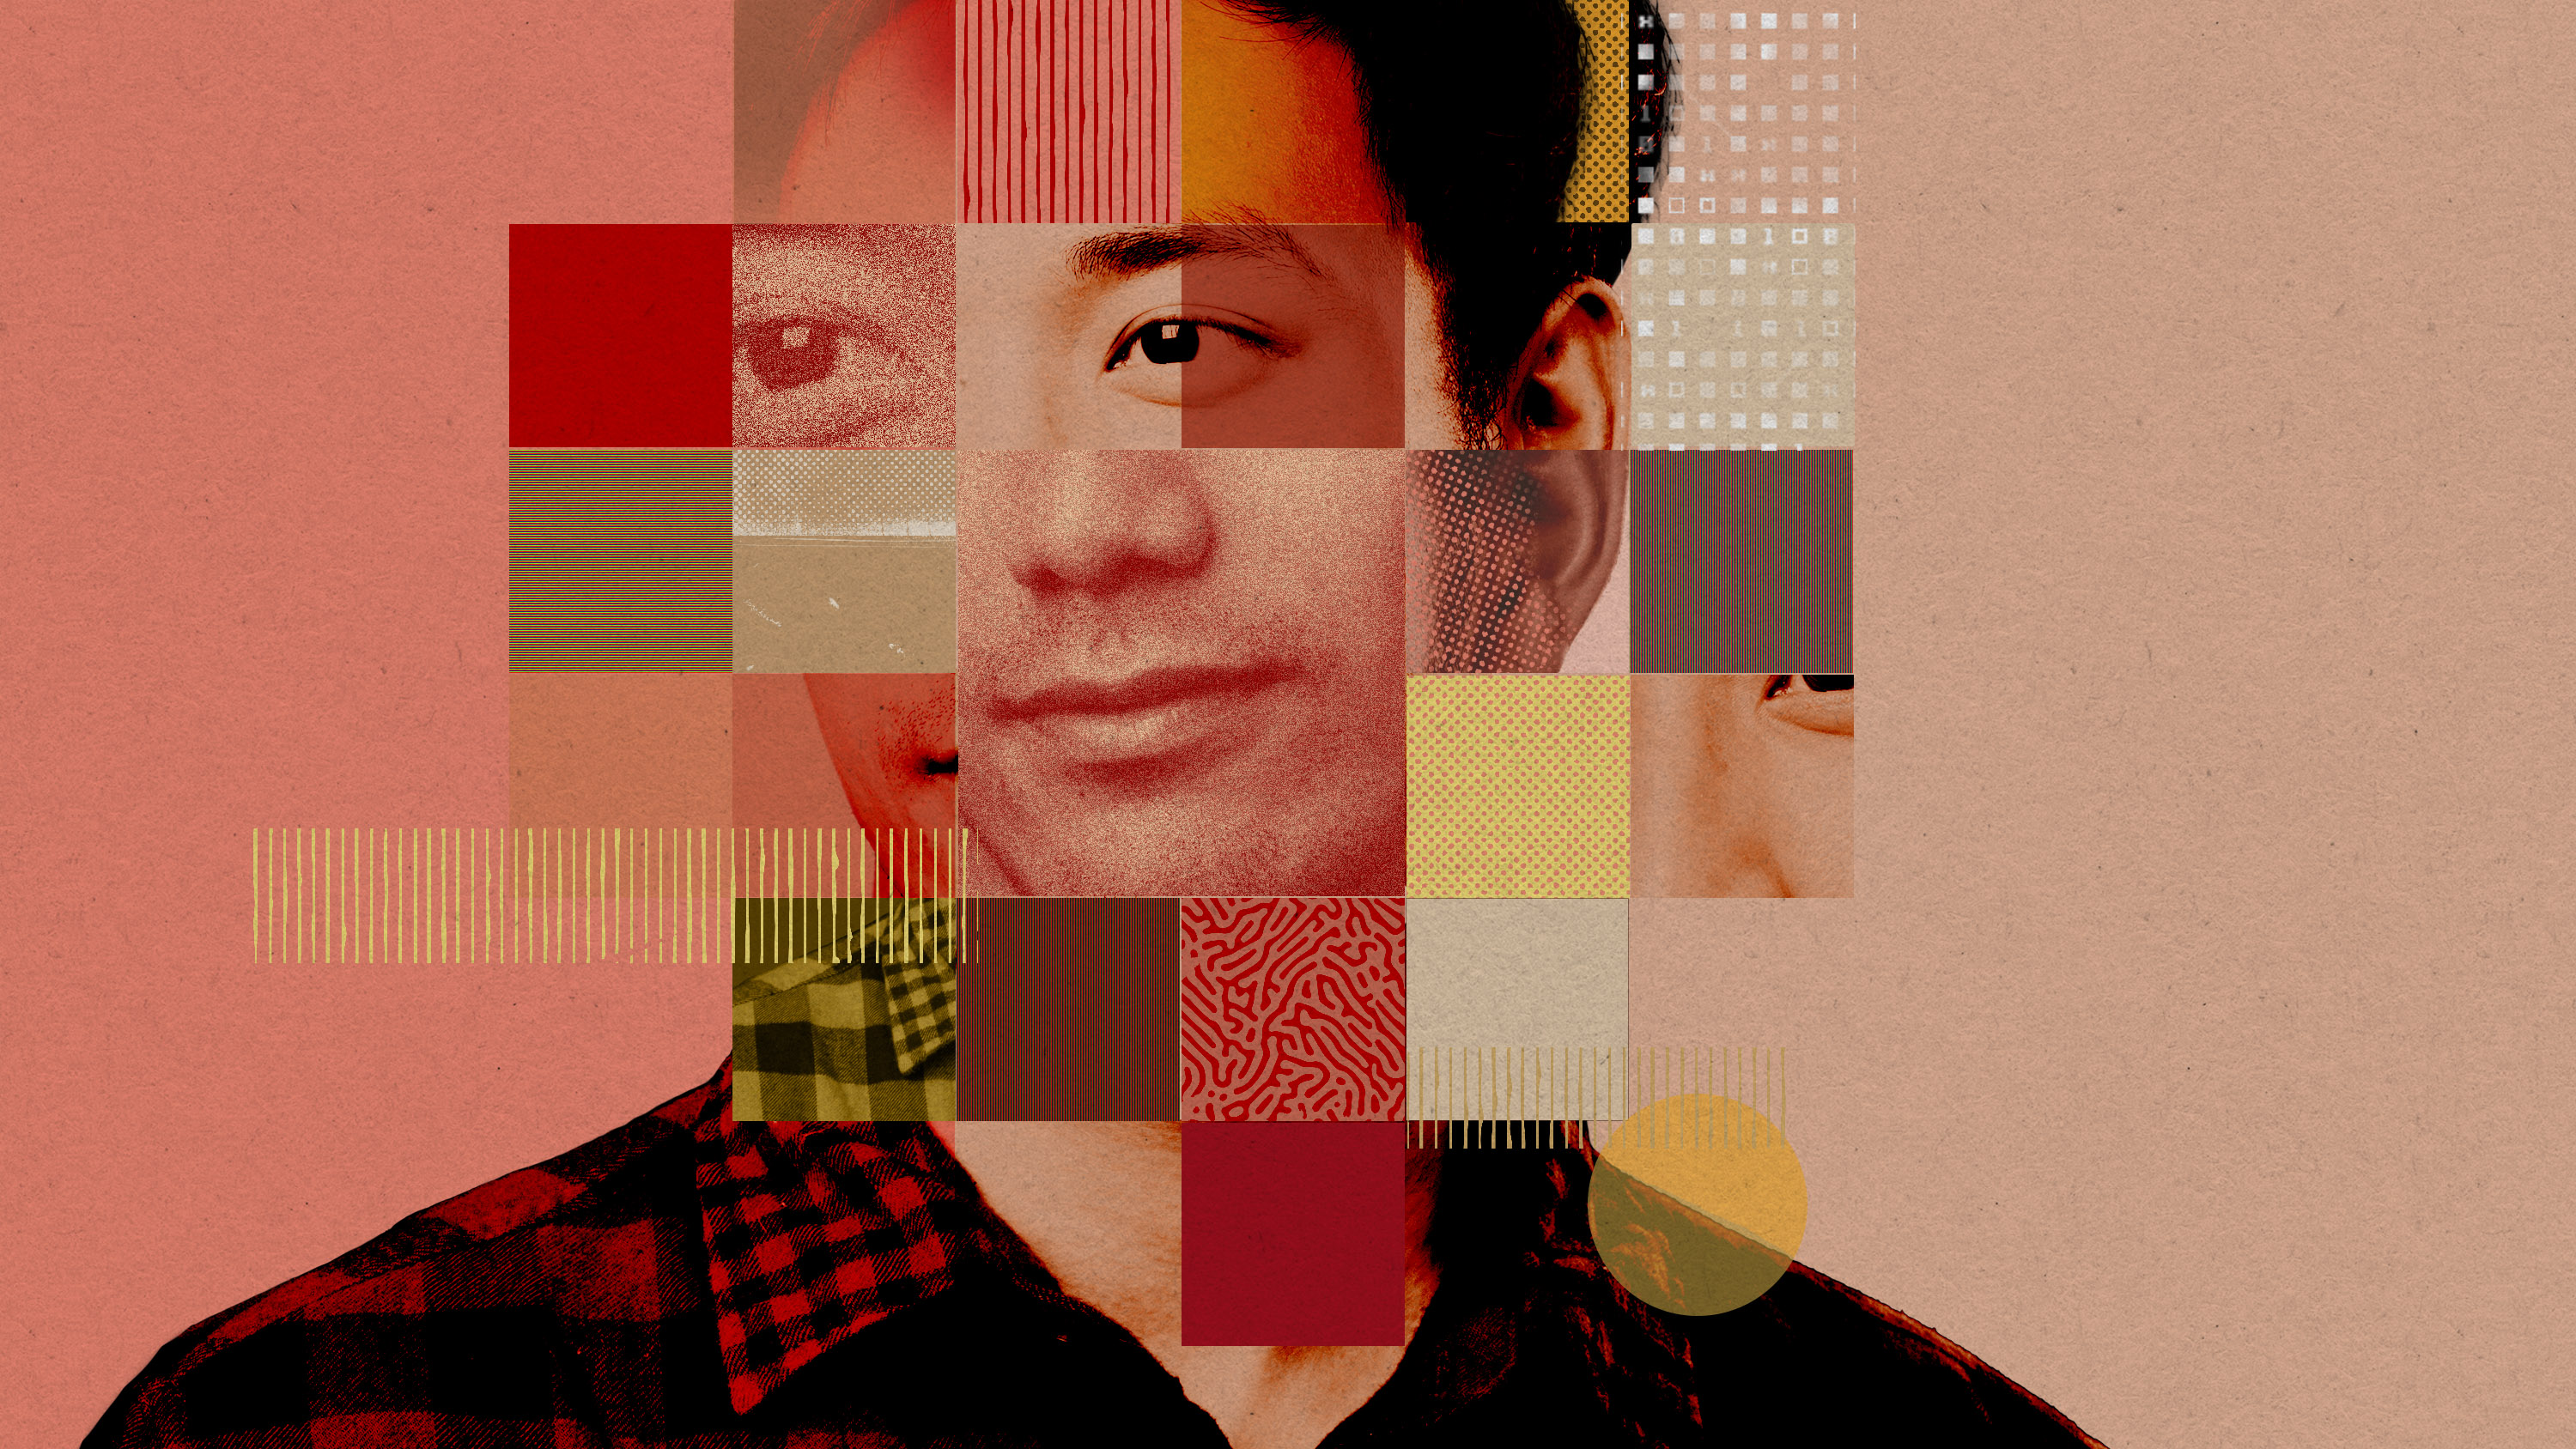 a man&#039;s portrait broken and reassembled into a grid with bar code and fingerprint patterns